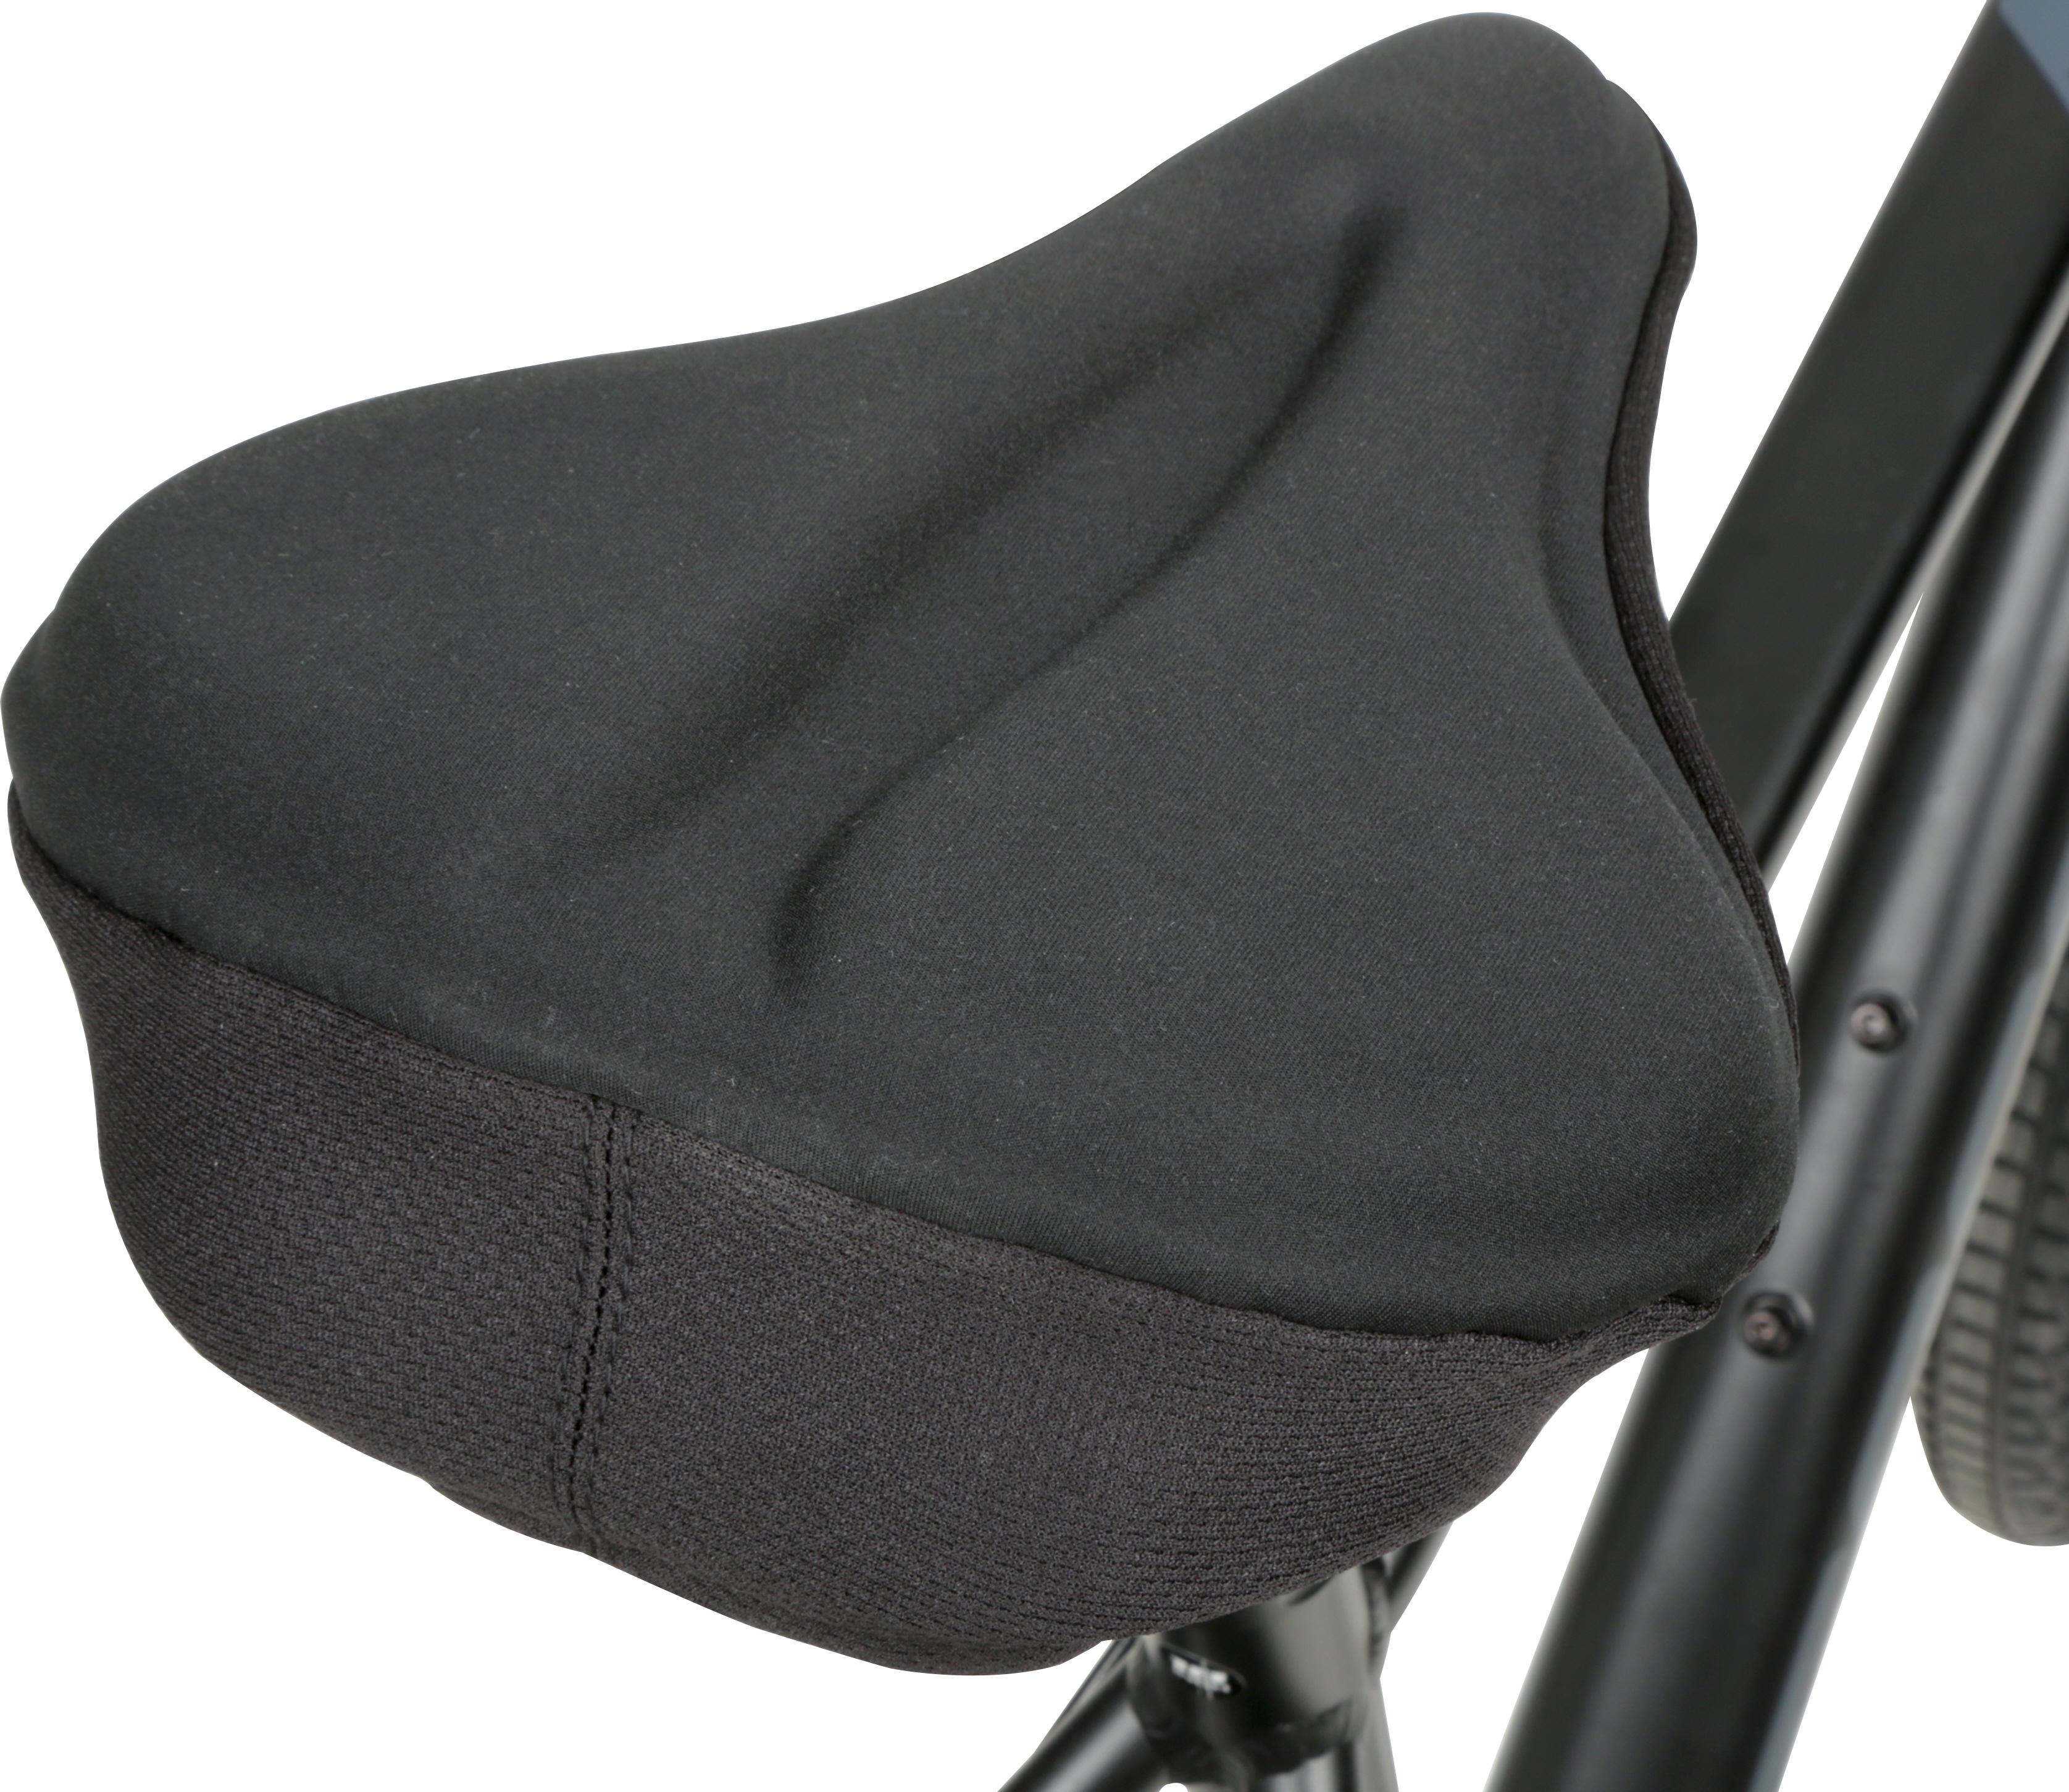 halfords bike seat covers